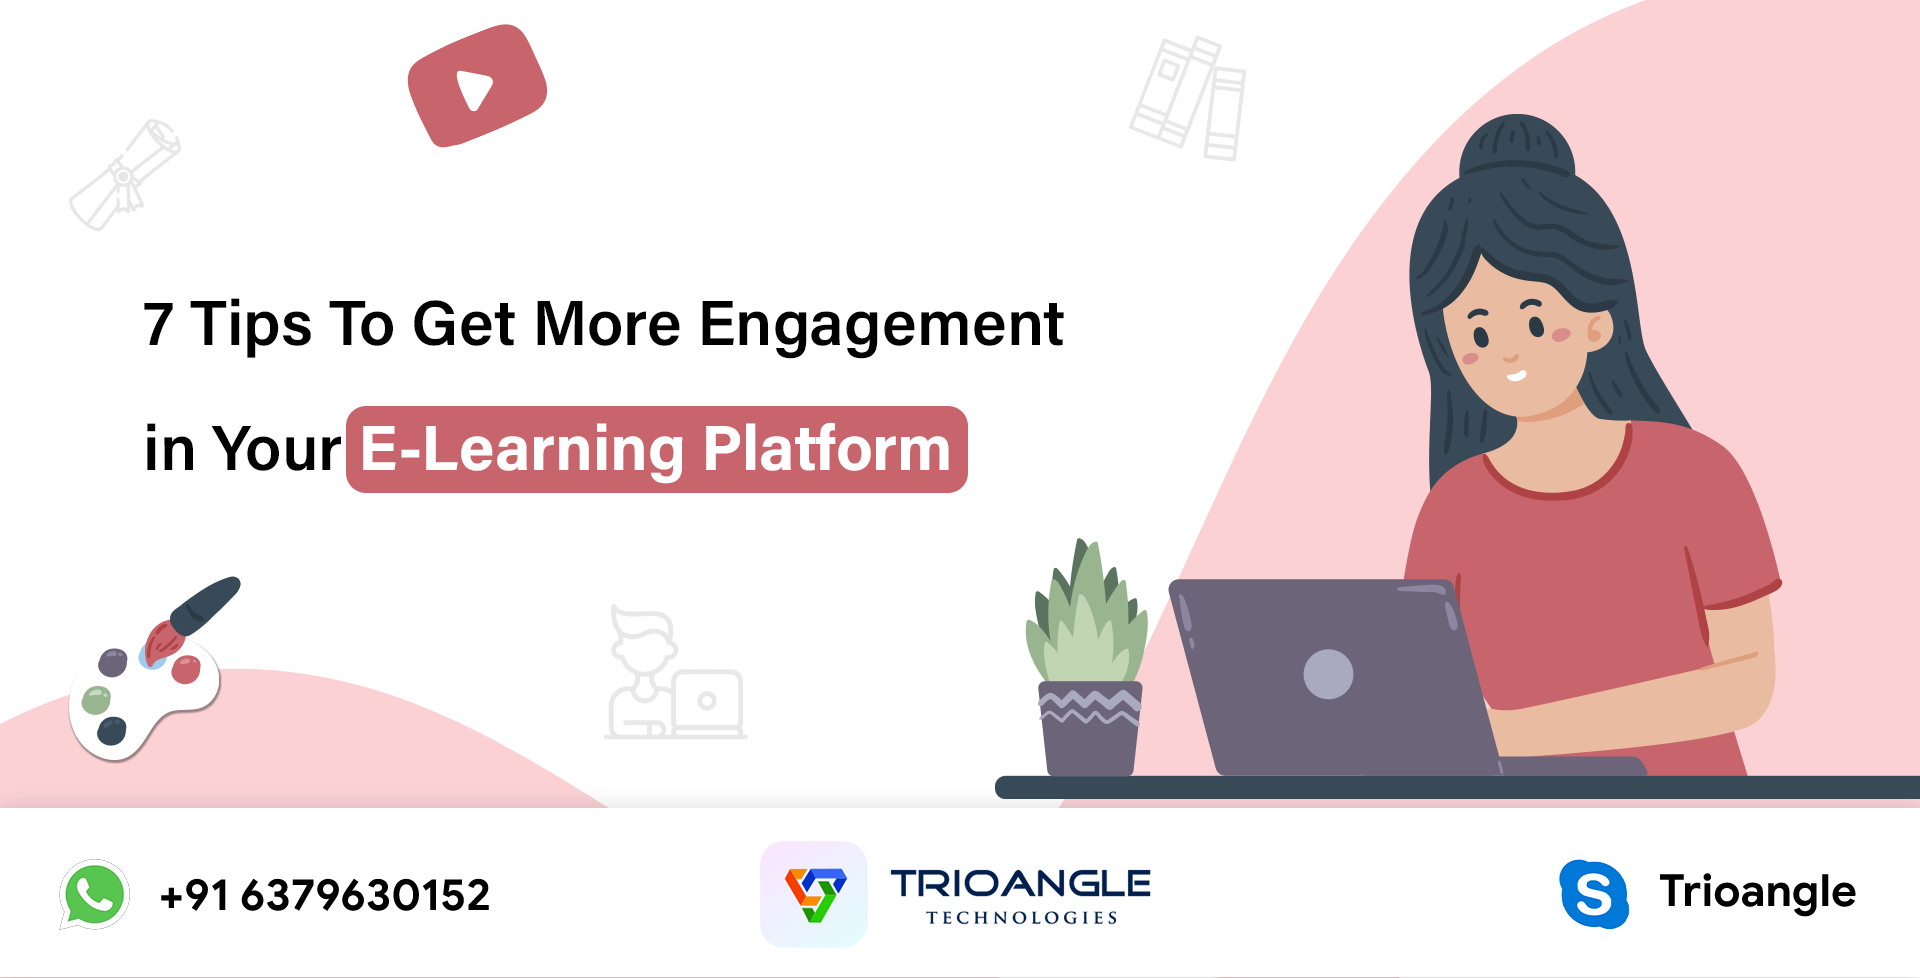 7 Tips To Get More Engagement in Your E-Learning Platform